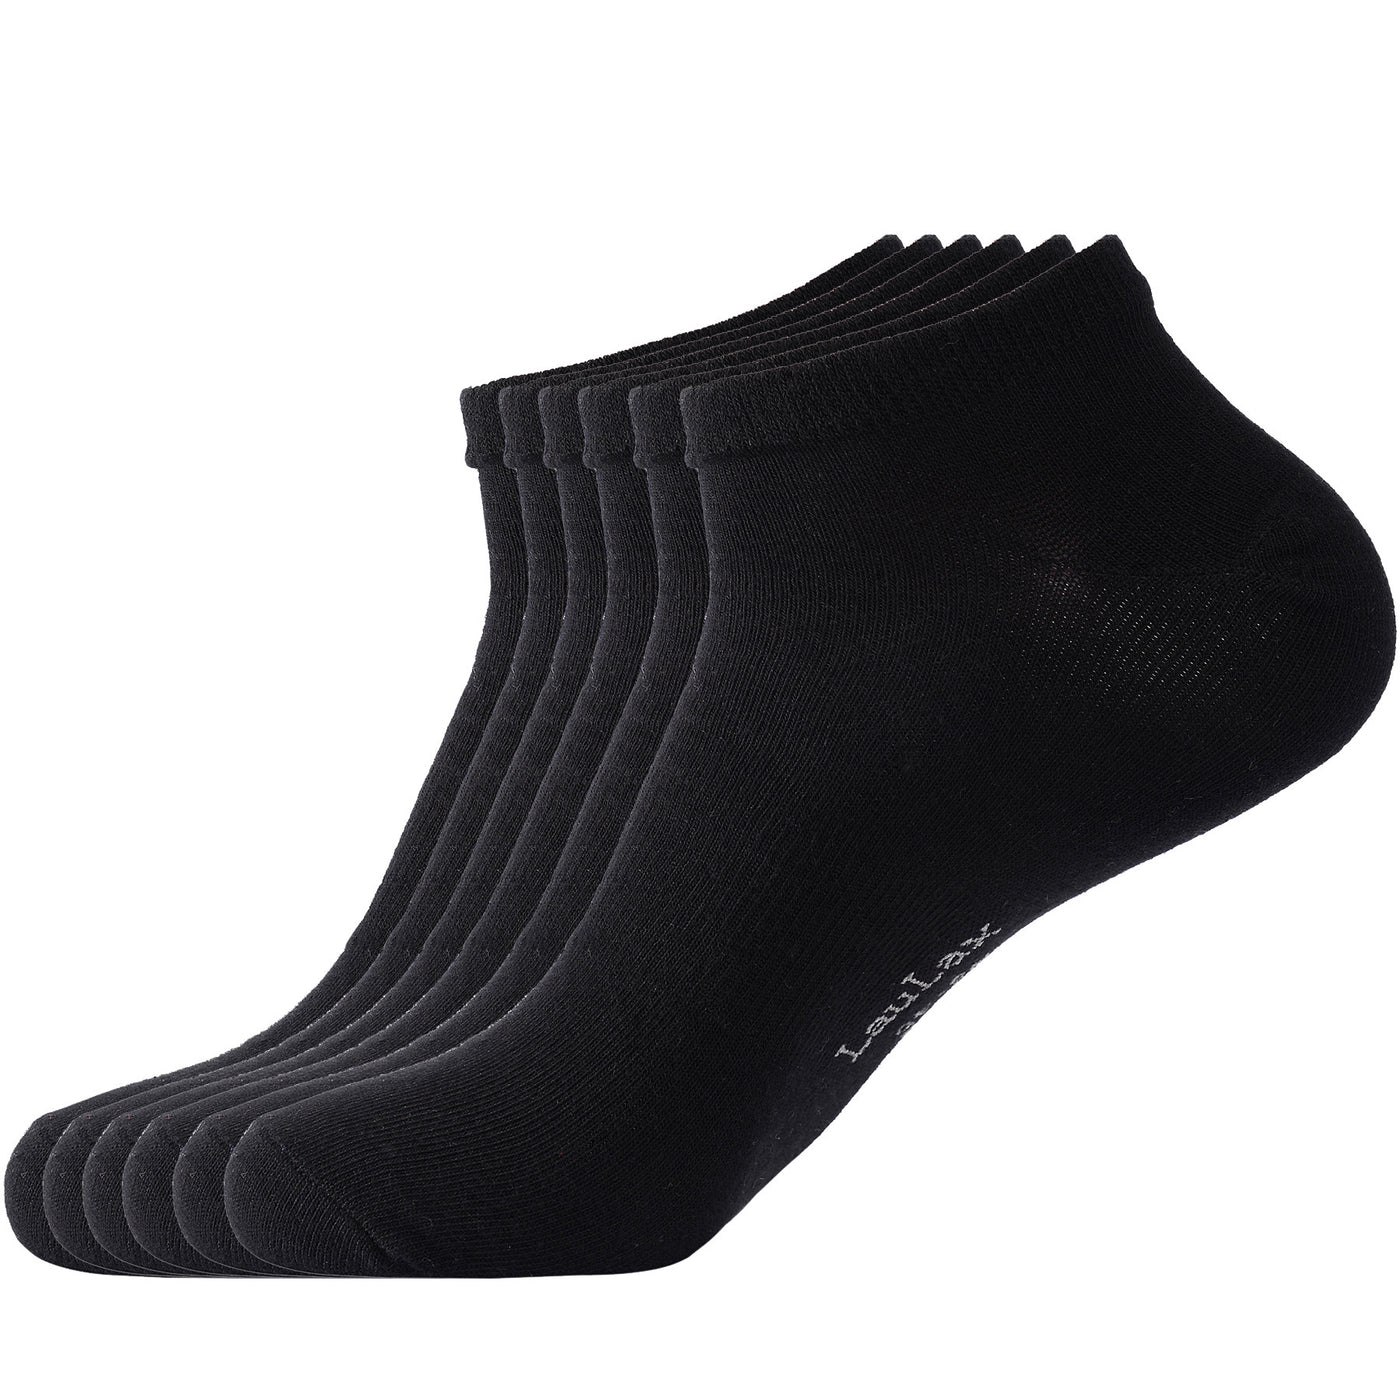 Laulax 6 Pairs Finest Combed Cotton Arch Support Trainer Socks, Black, Size UK 12 - 14 / Europ 47 - 49